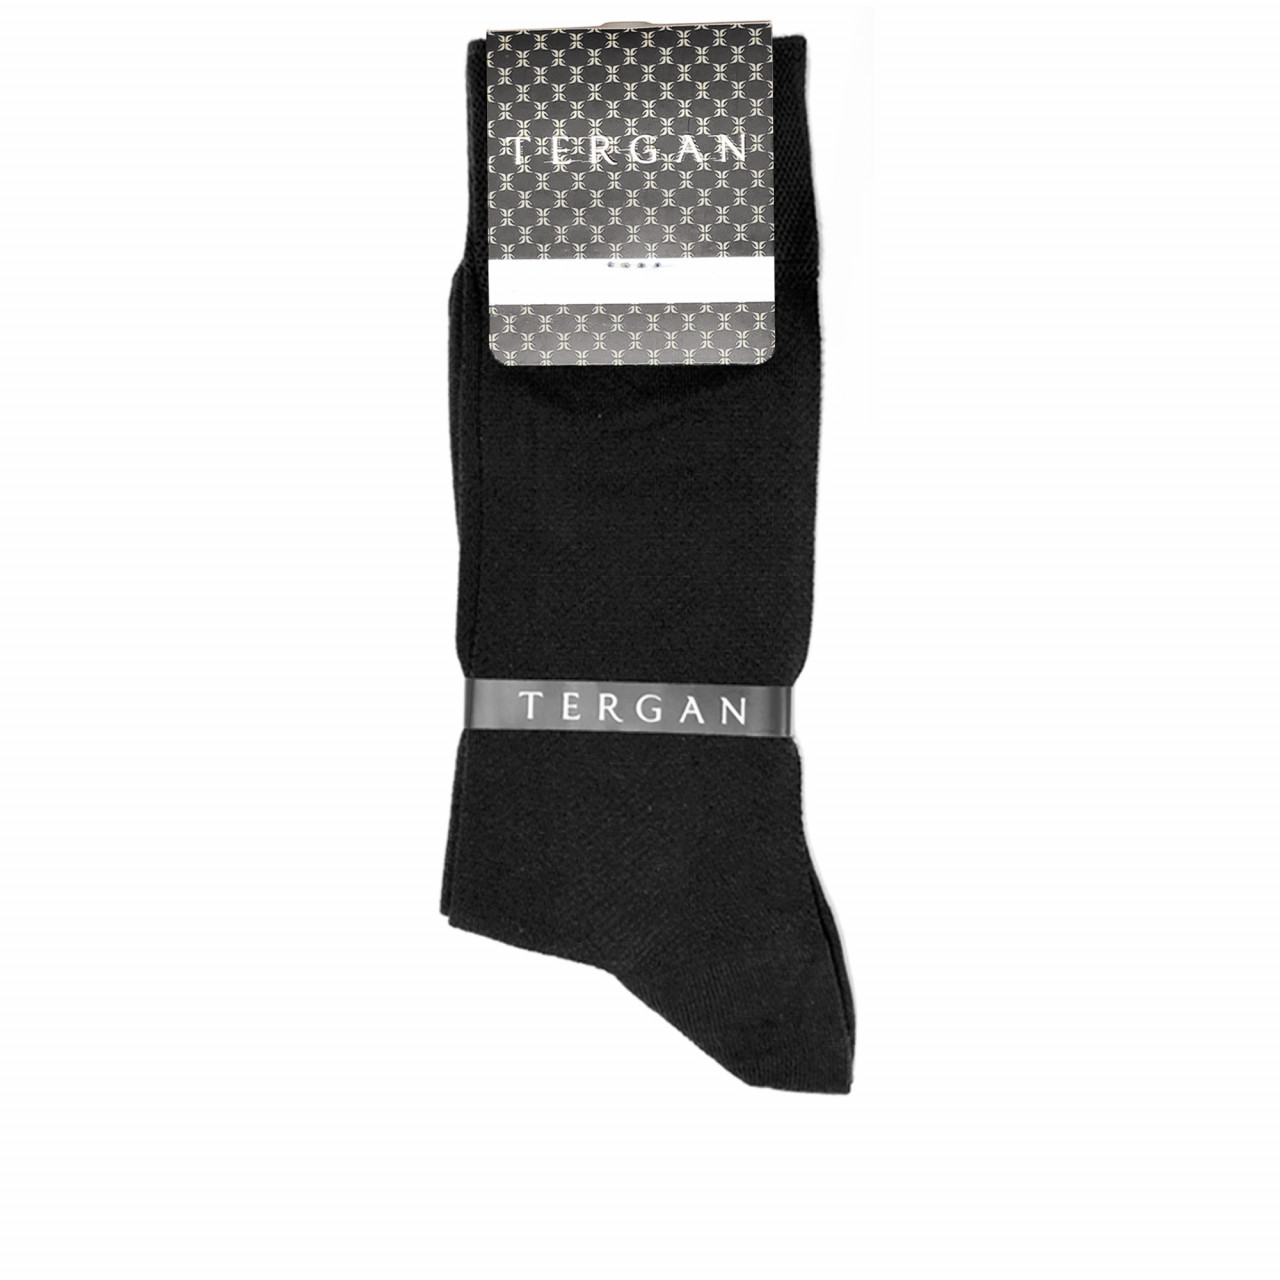 Men's elegant business socks made of pure silk and cotton in black